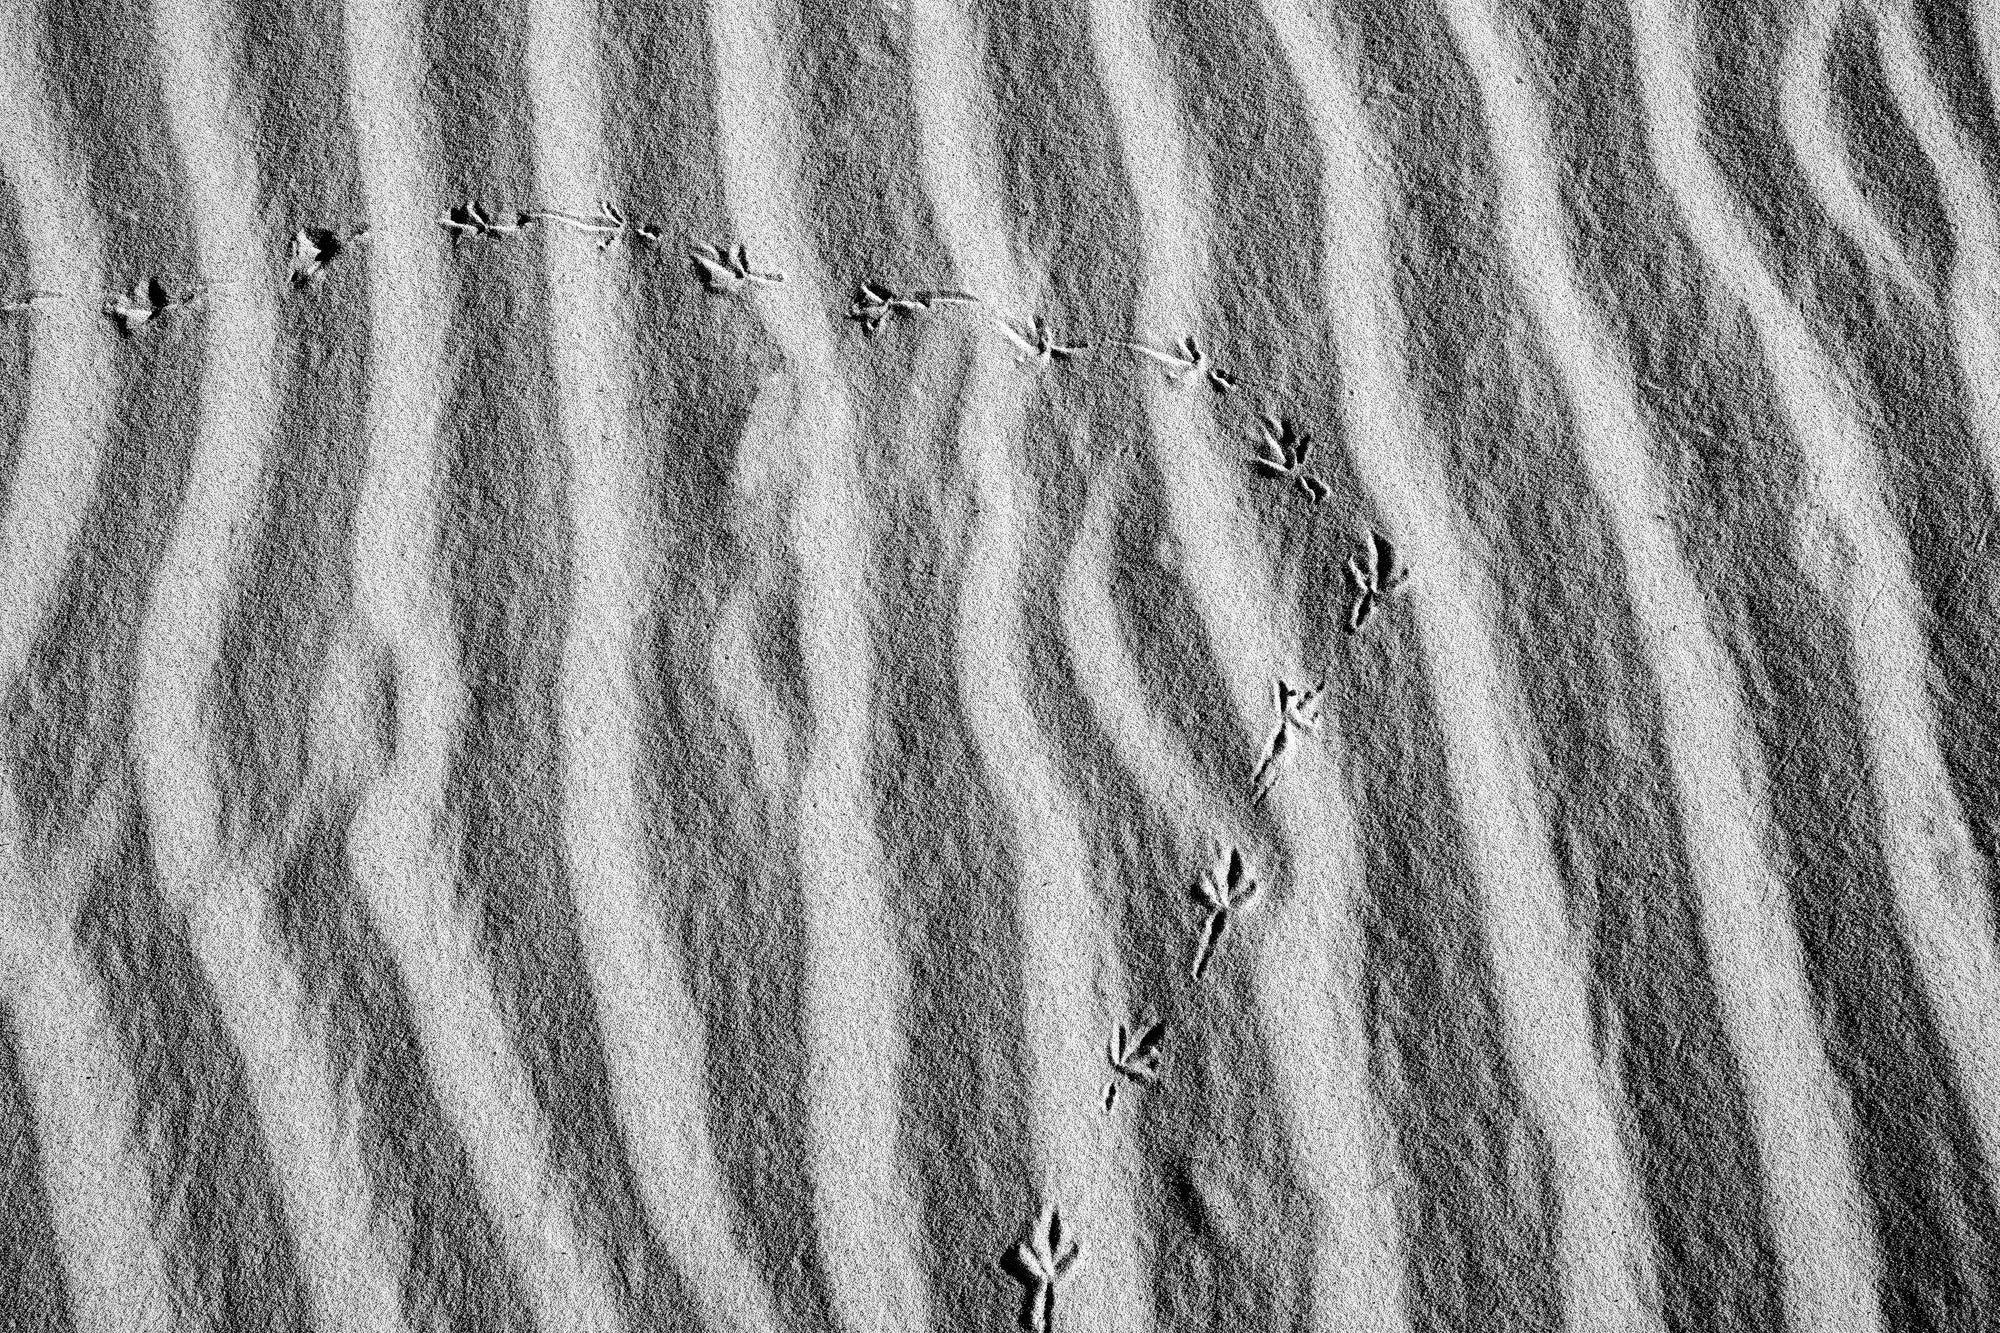 Tiny Bird Tracks Across Ripples of Sand: Black and White Landscape Photograph by Keith Dotson. Click to buy a signed print.